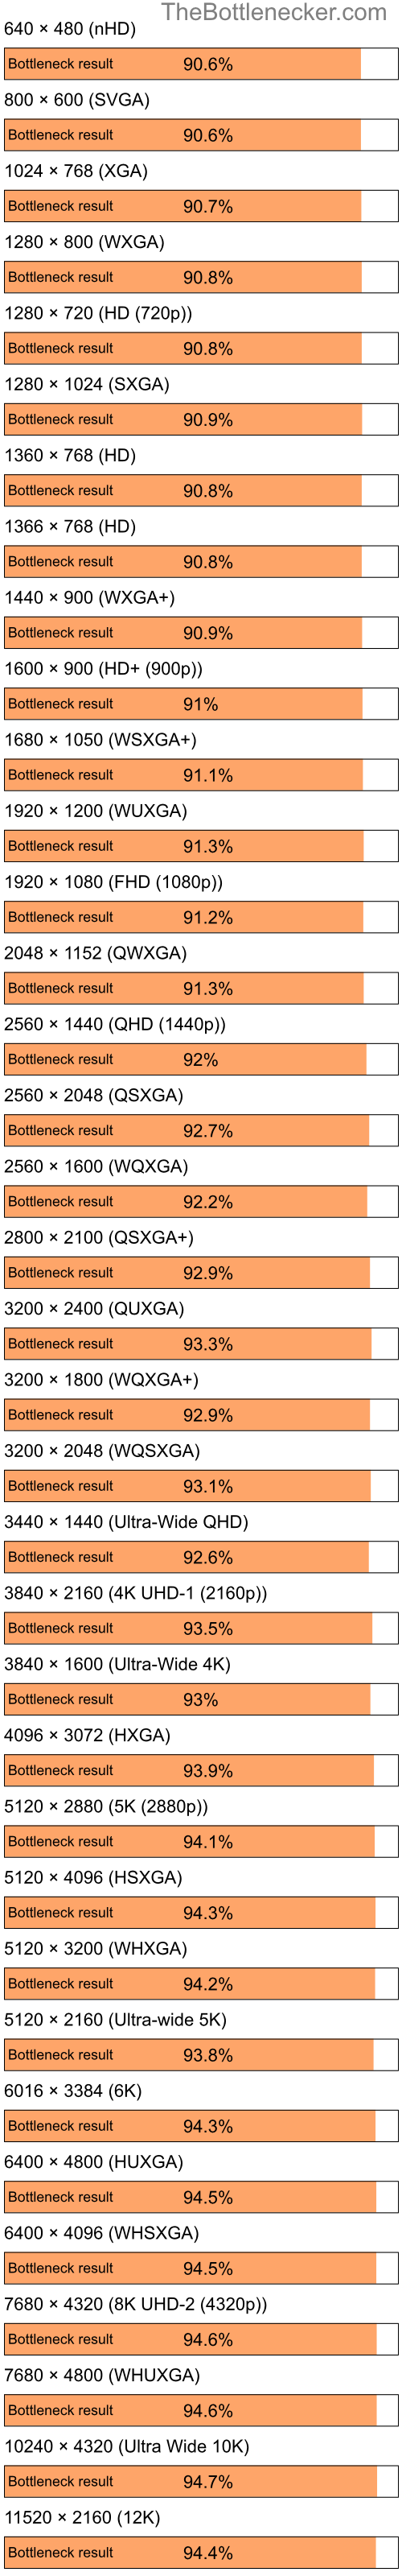 Bottleneck results by resolution for Intel Celeron M and AMD Radeon 9200 in7 Days to Die